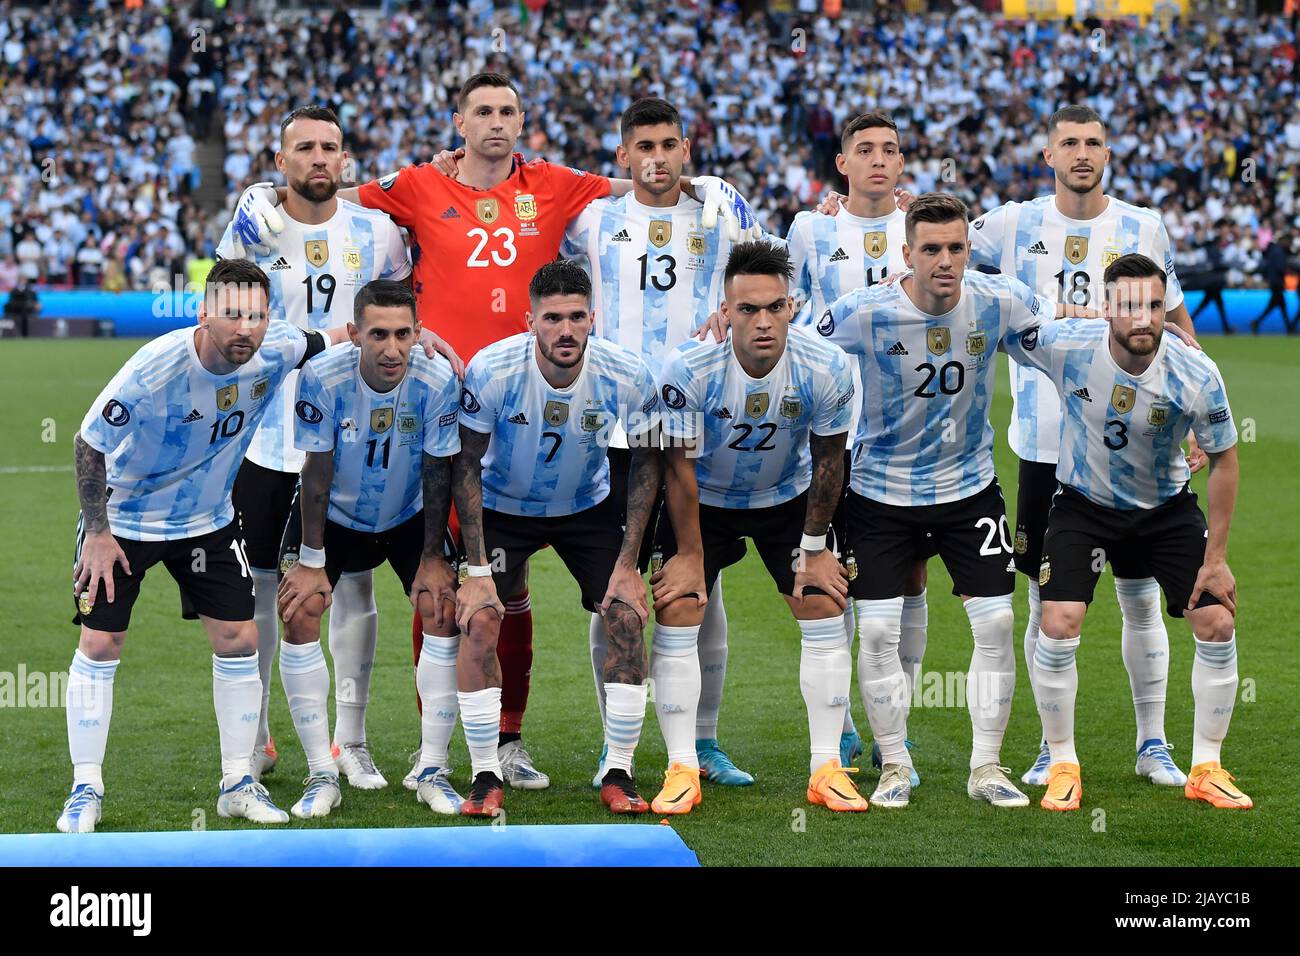 London, France. 01st June, 2022. Agentina players pose for a team photo during the Finalissima trophy 2022 football match between Italy and Argentina at Wembley stadium in London, England, June 1st, 2022. Photo Andrea Staccioli/Insidefoto Credit: insidefoto srl/Alamy Live News Stock Photo